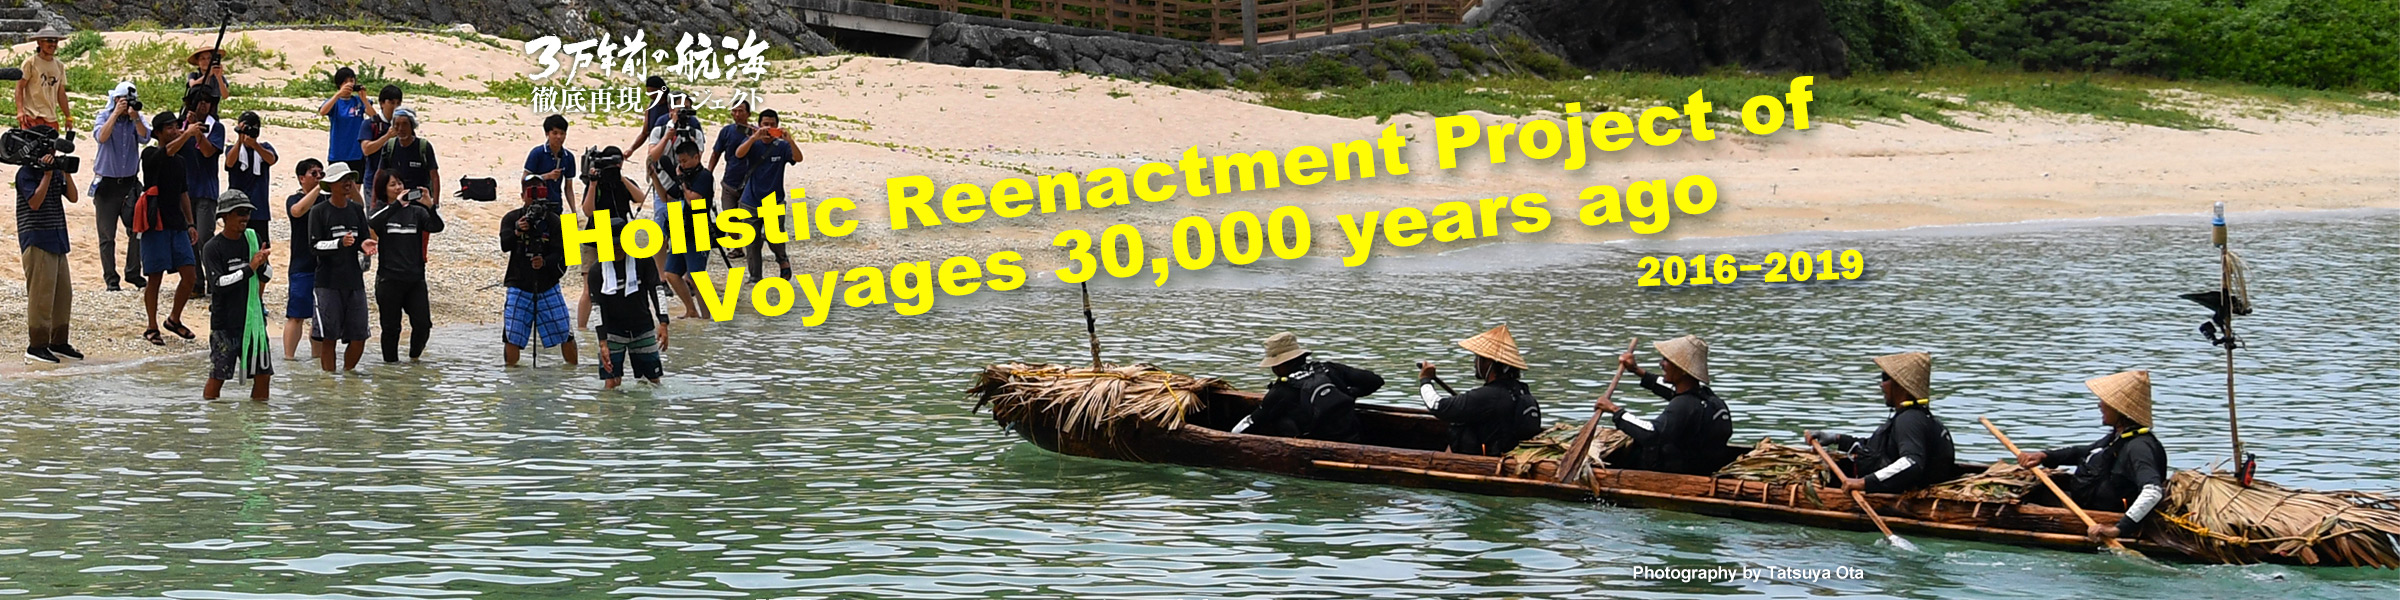 Holistic reenactment project of voyages 30,000 years ago.[final experimental voyage]